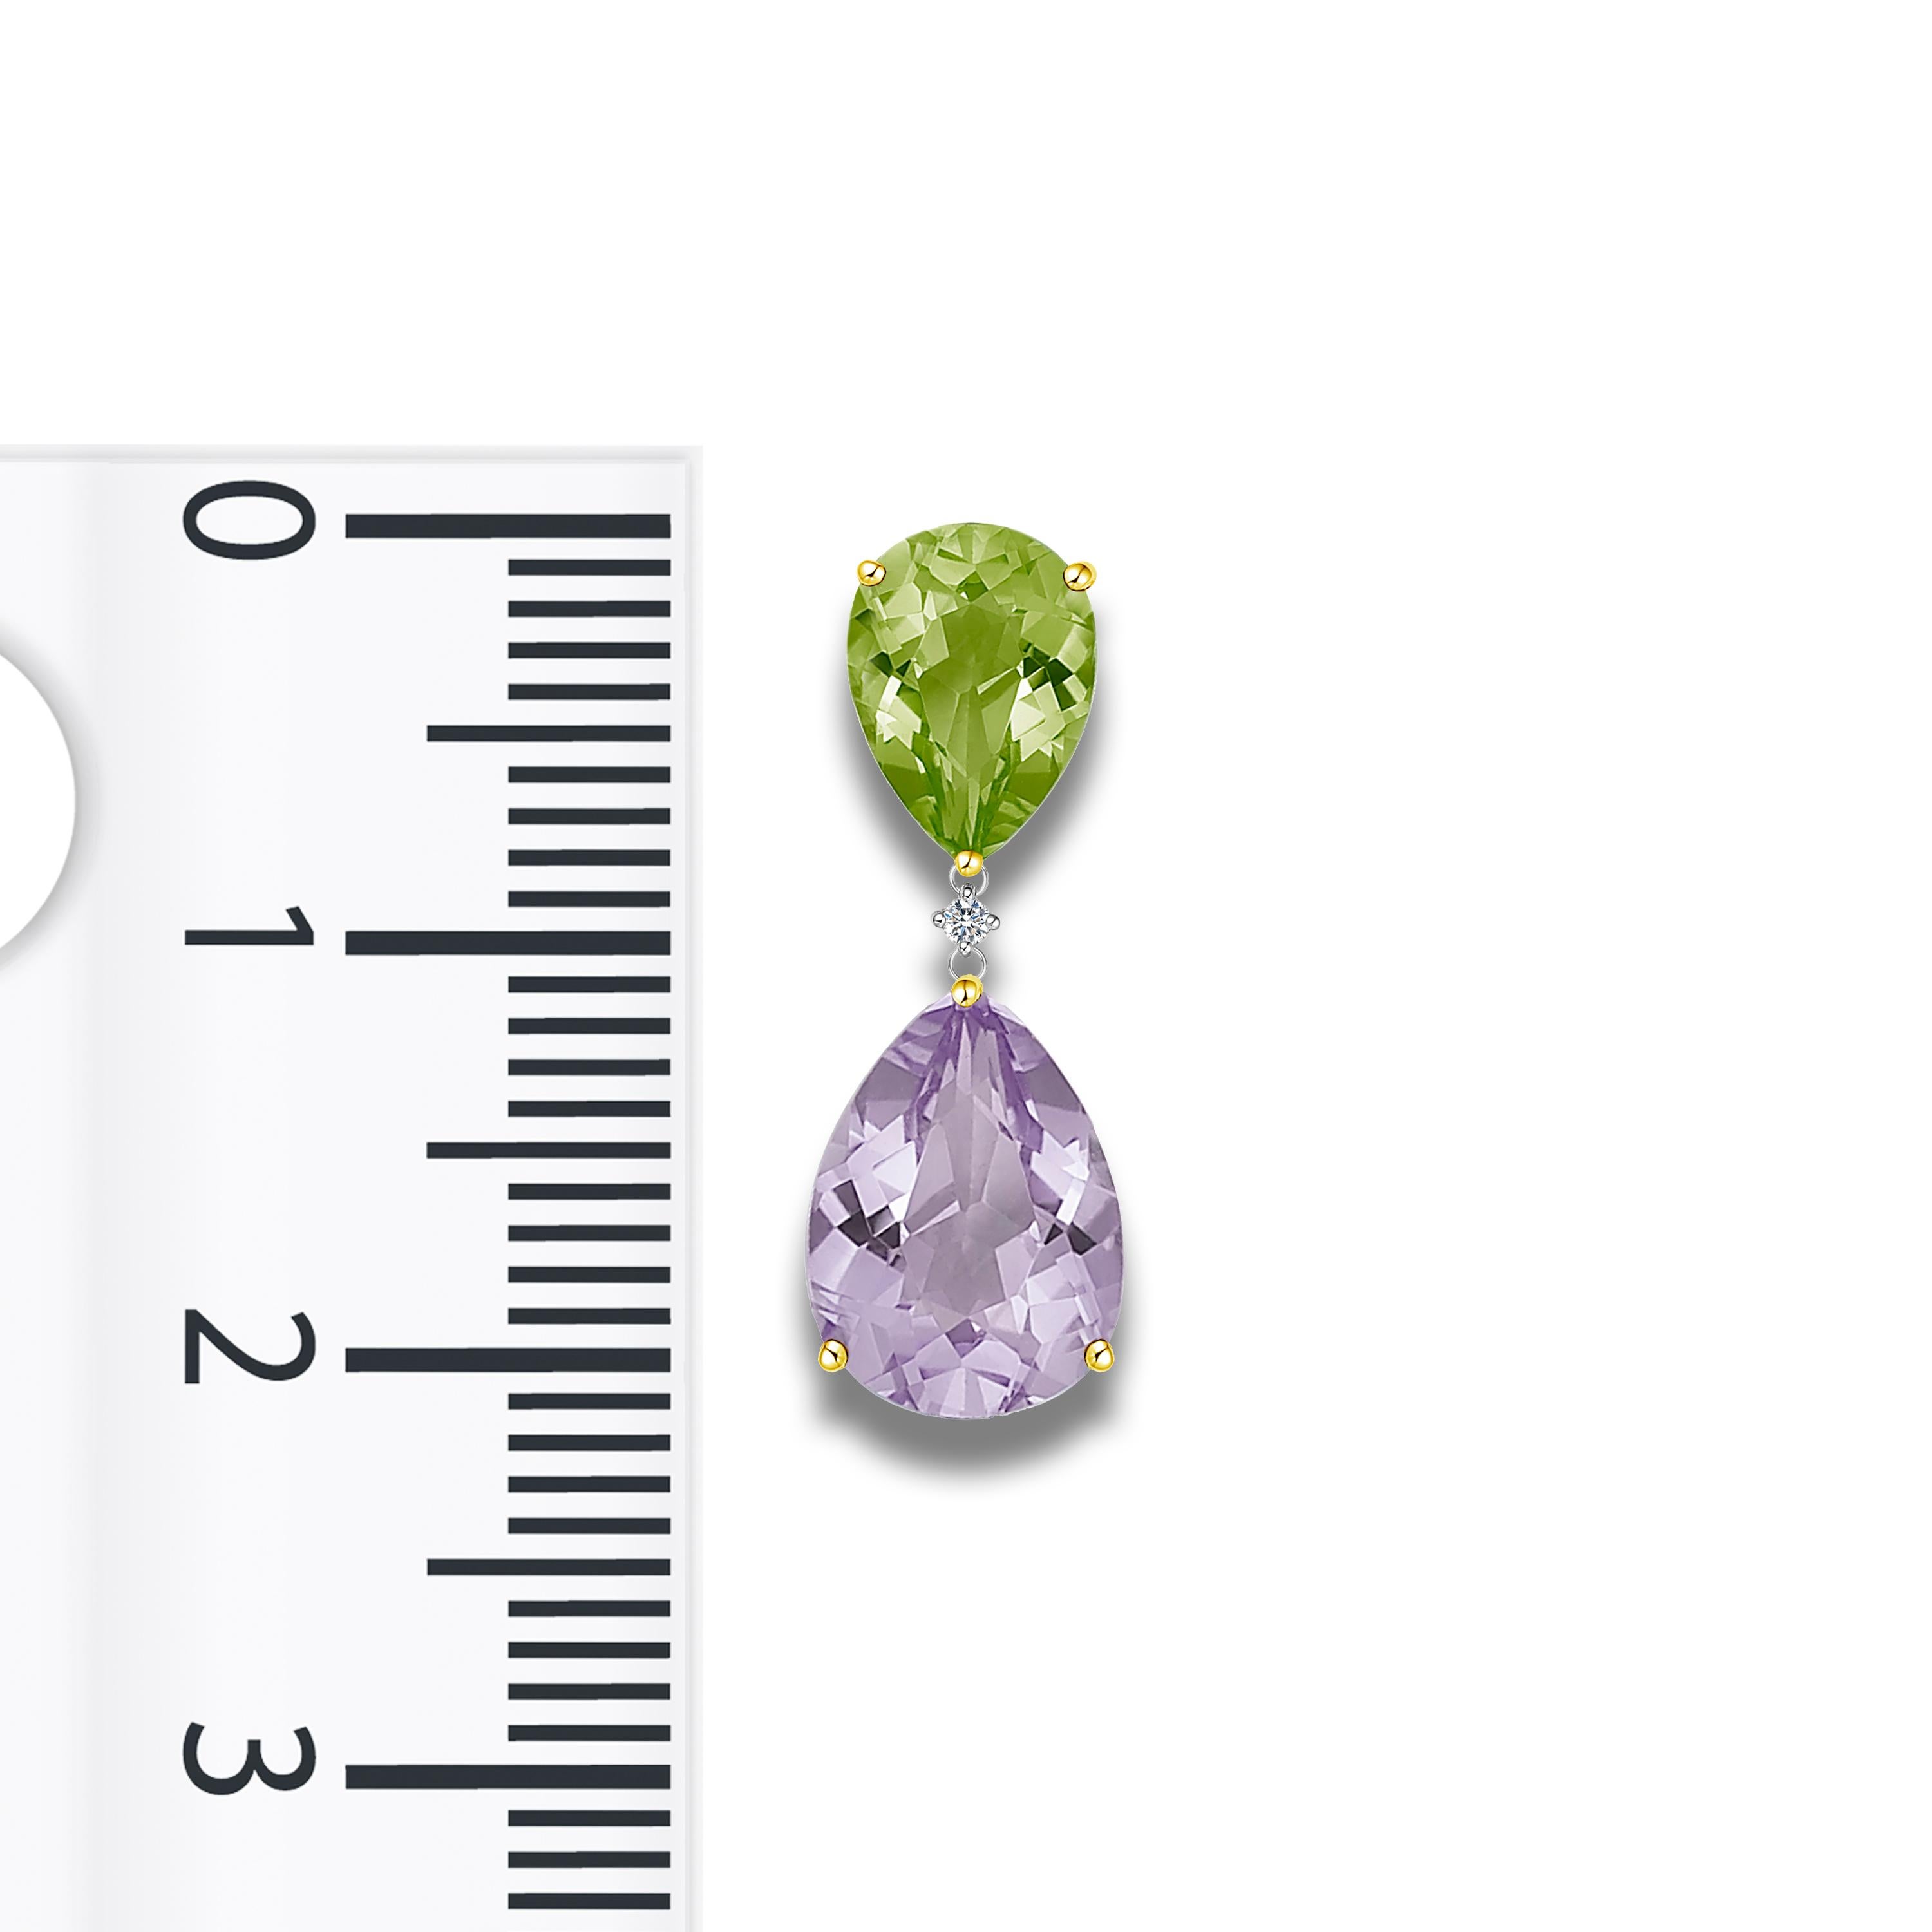 Description:
Add a touch of colour to your look with bright, breathtaking gemstones. These drop earrings feature 1.40ct peridots, 0.038ct diamonds and 4.80ct purple amethysts set in 18ct white gold with yellow gold-plated